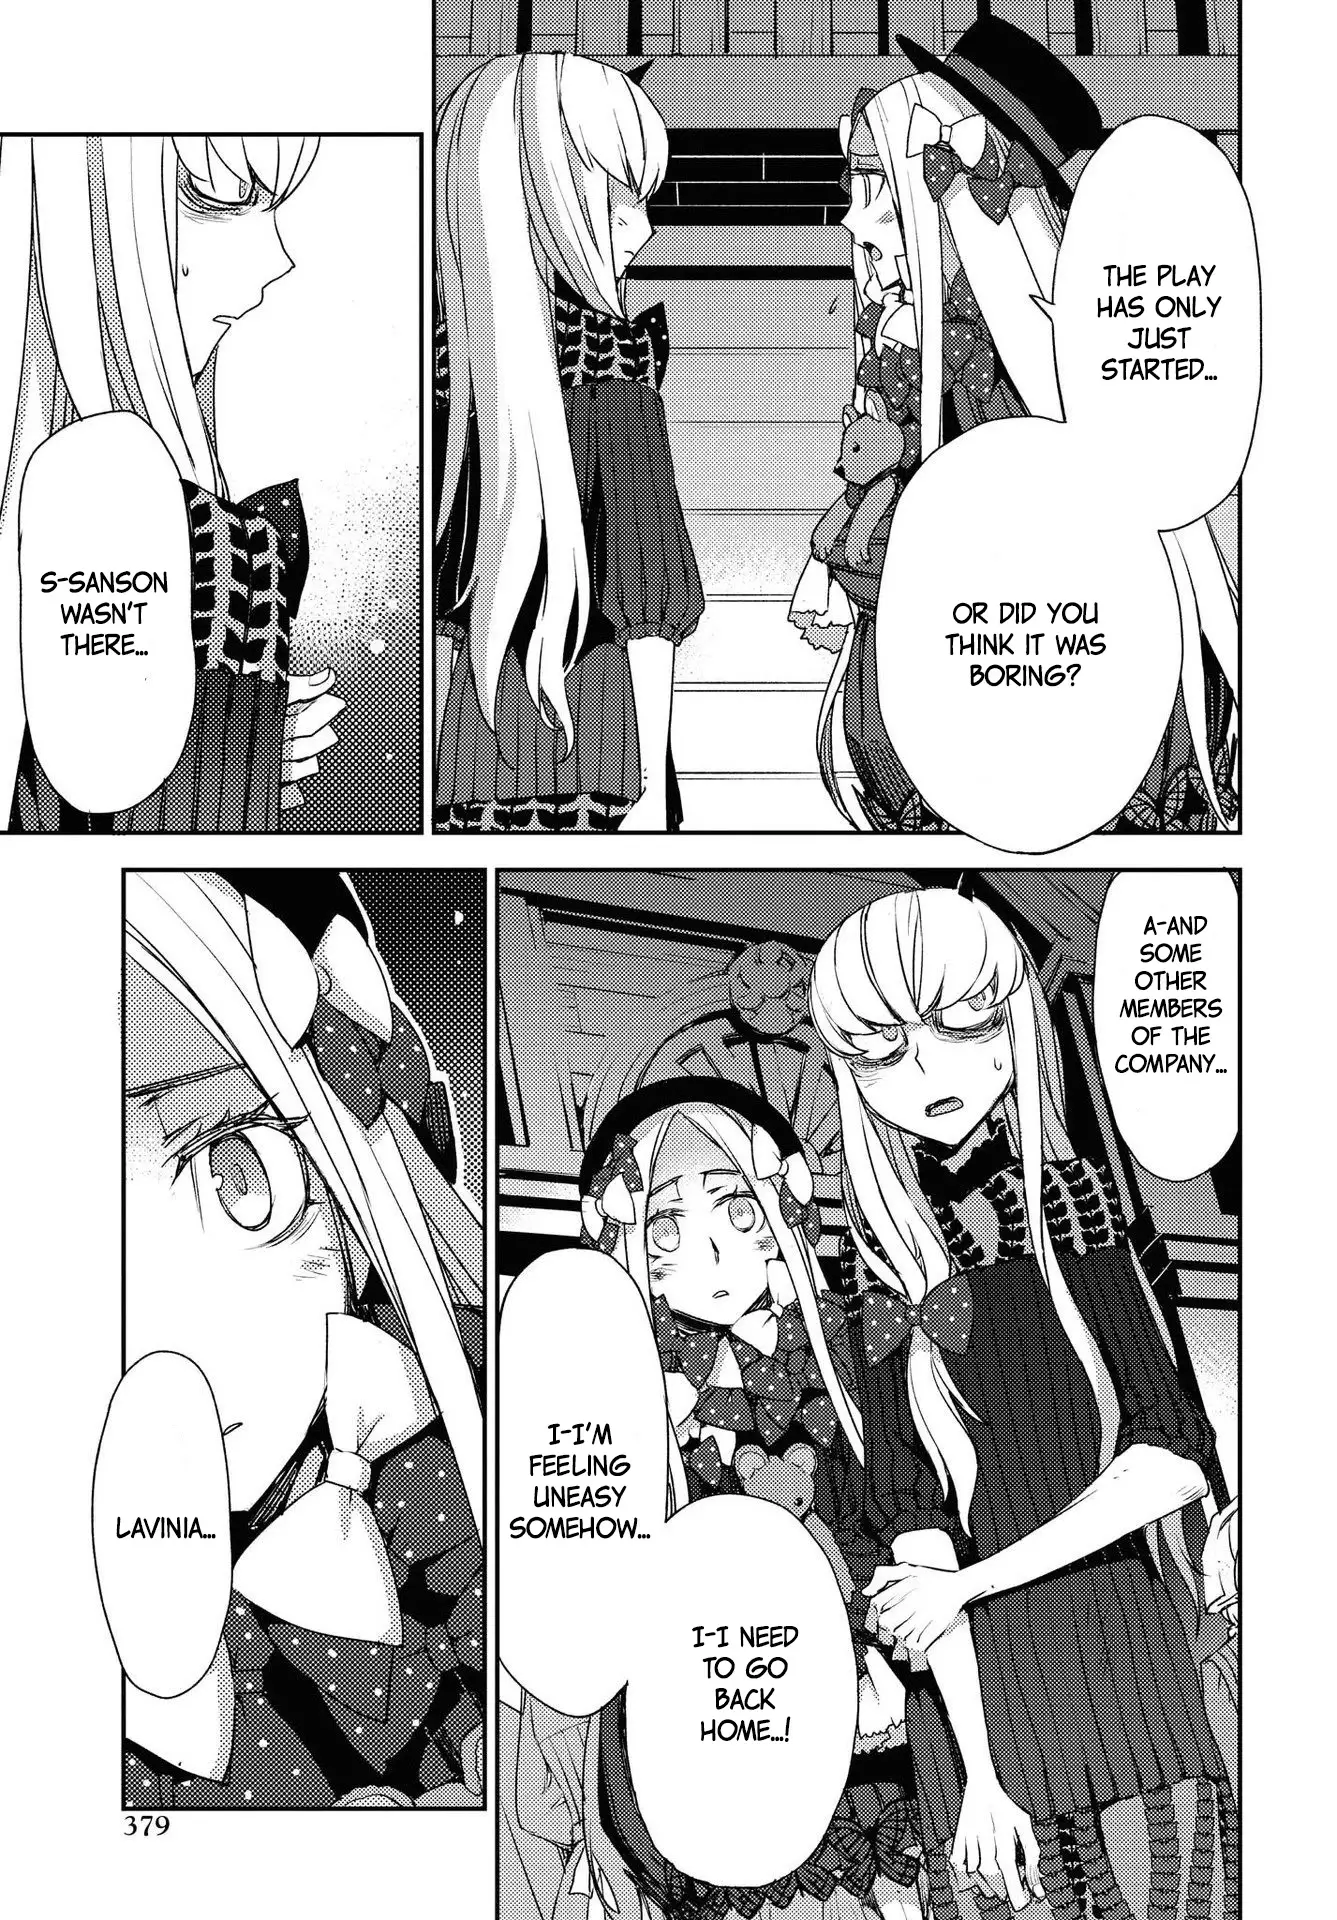 Fate/grand Order: Epic Of Remnant - Subspecies Singularity Iv: Taboo Advent Salem: Salem Of Heresy - 22 page 14-30b6dbf7